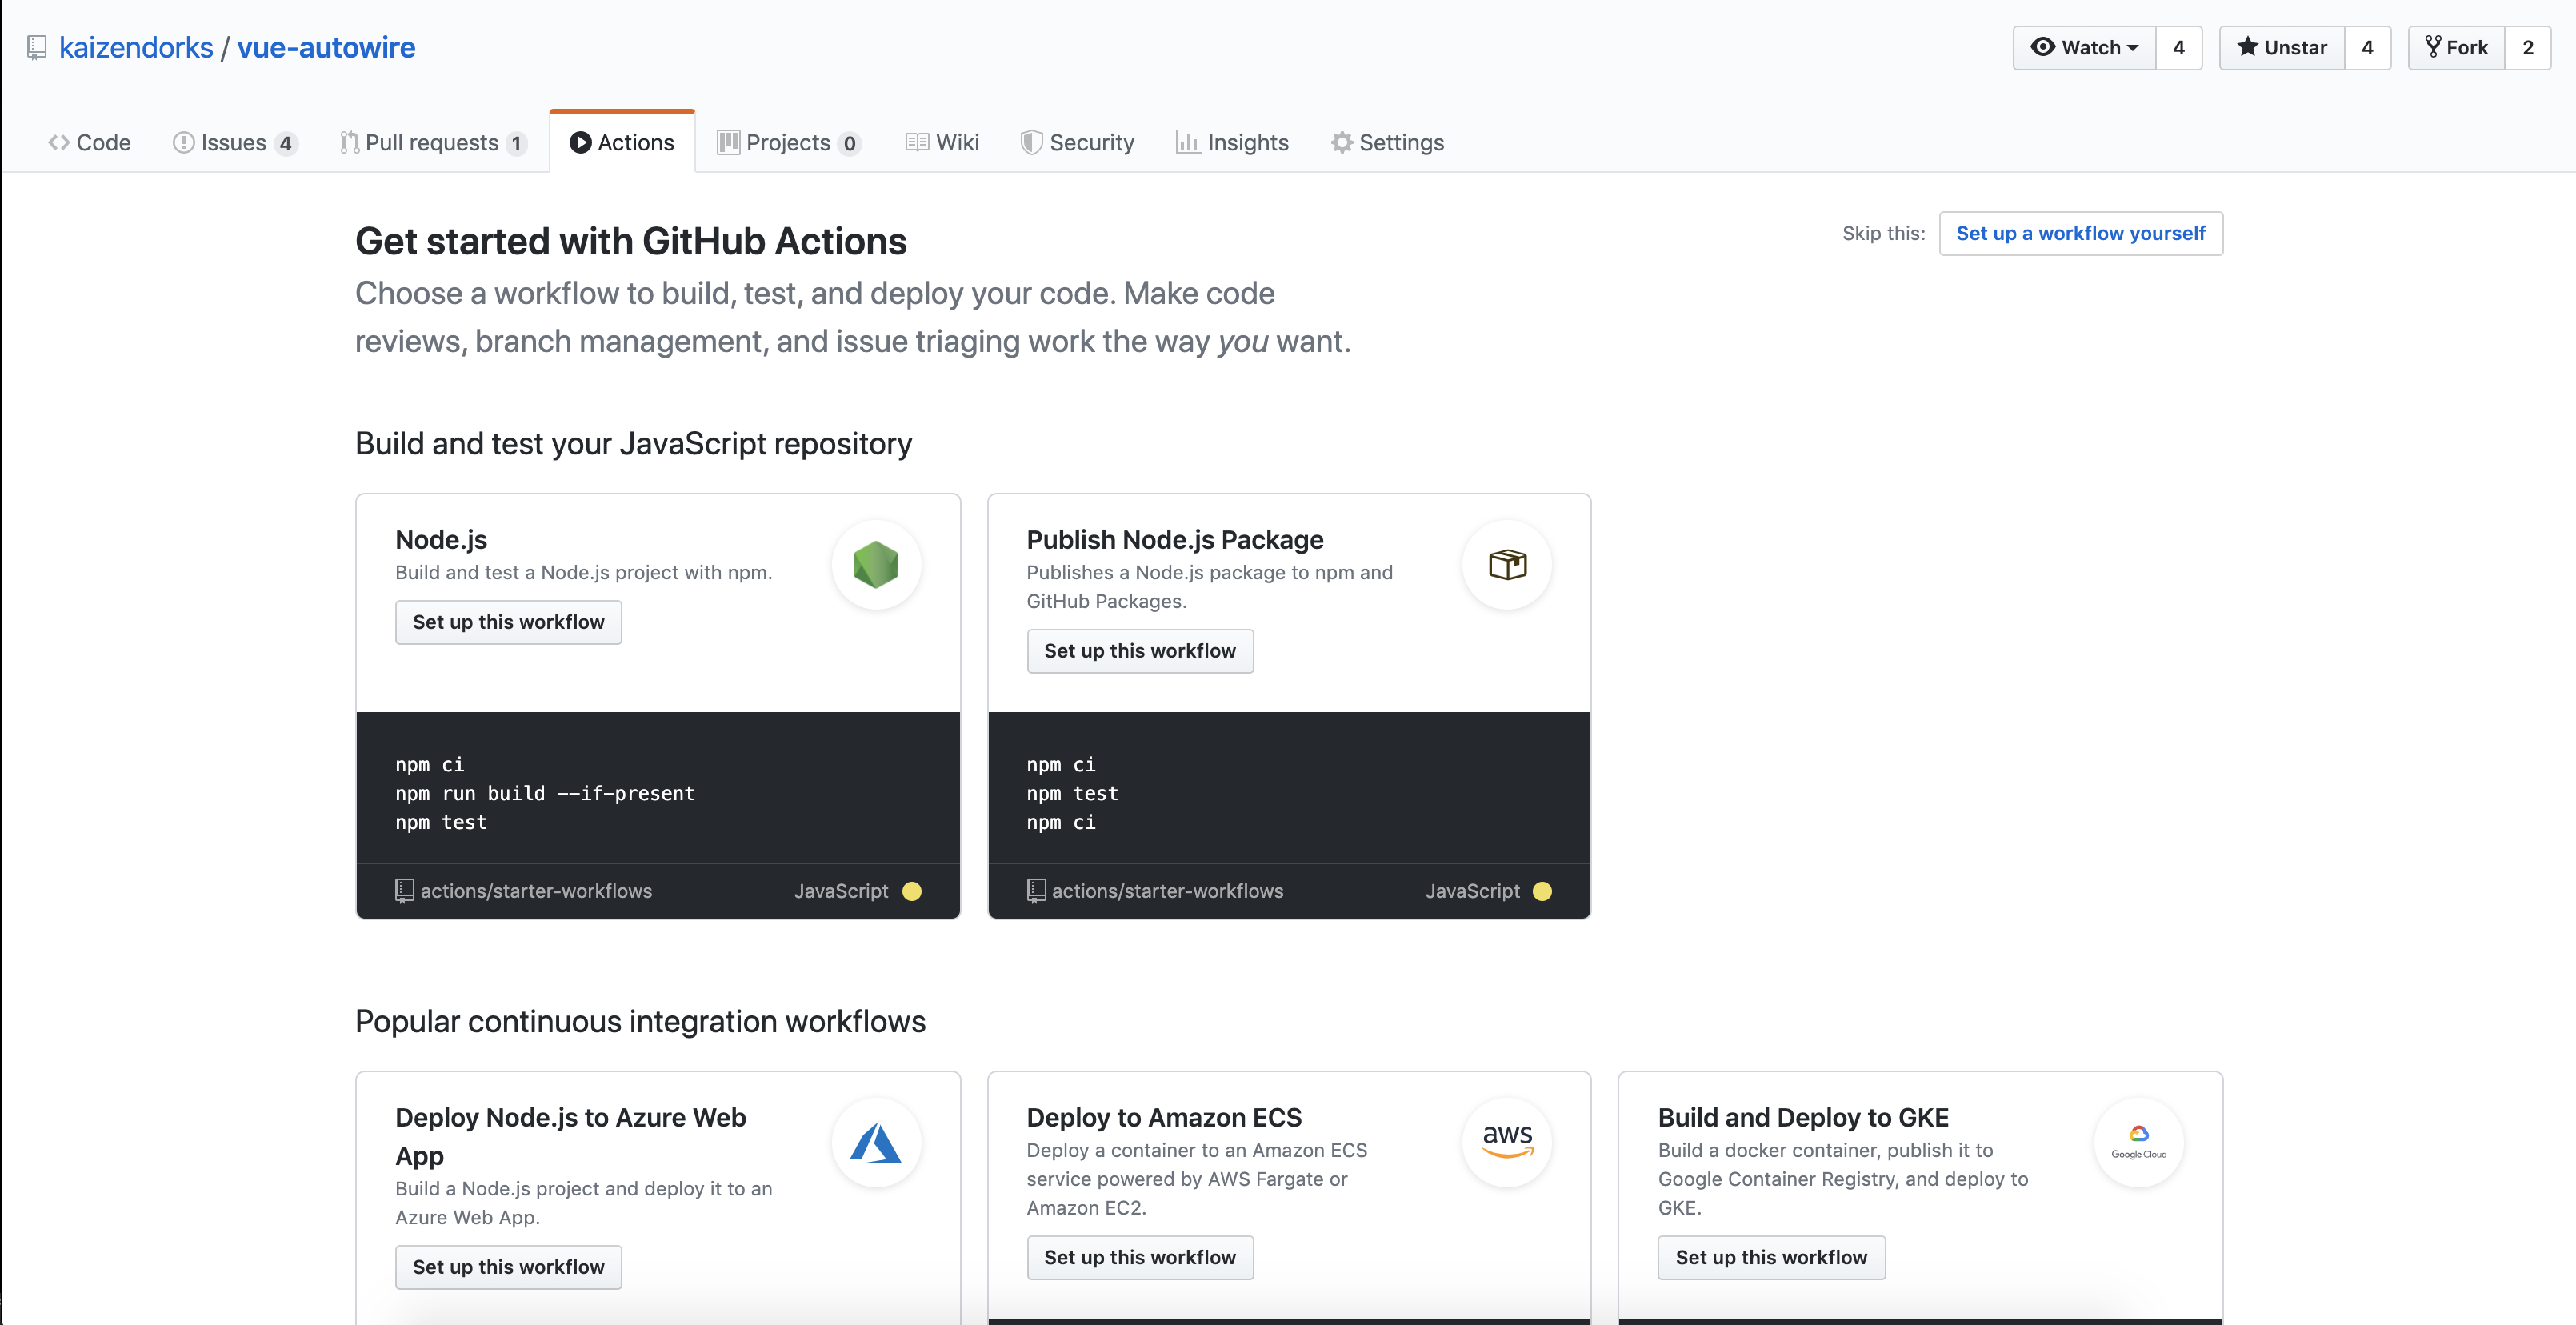 Getting started with GitHub Actions